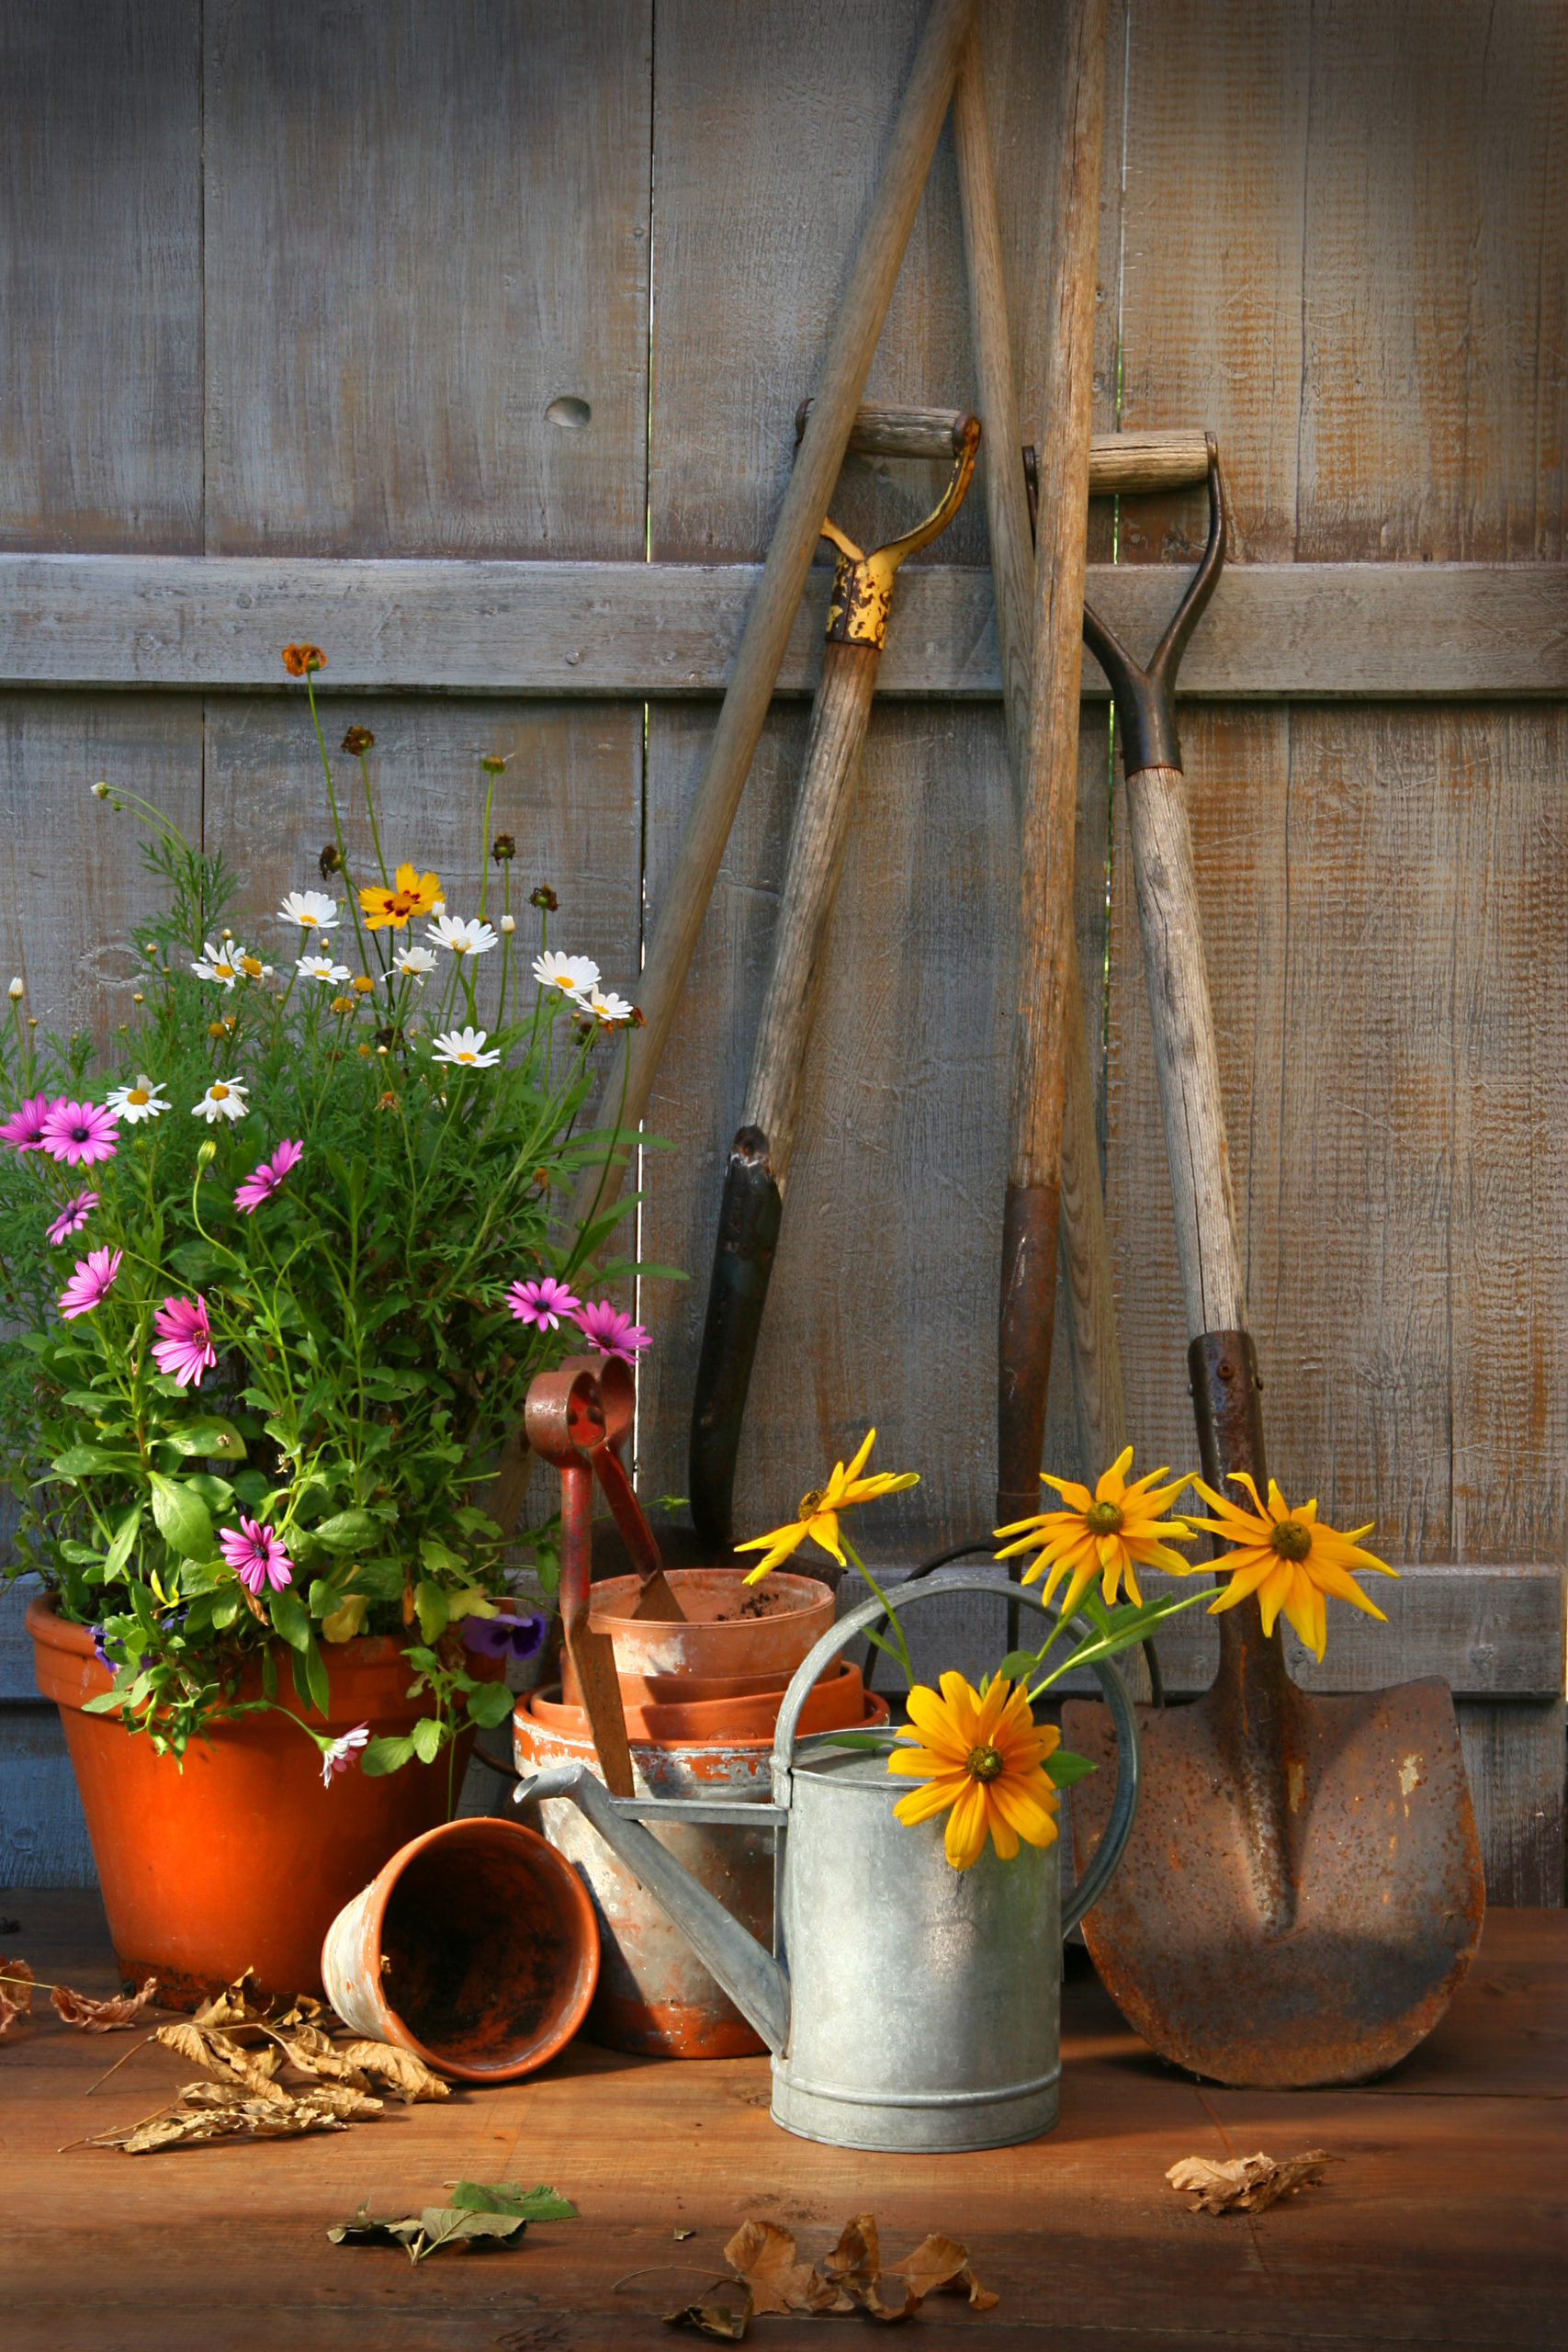 Garden shed with tools and flower pots